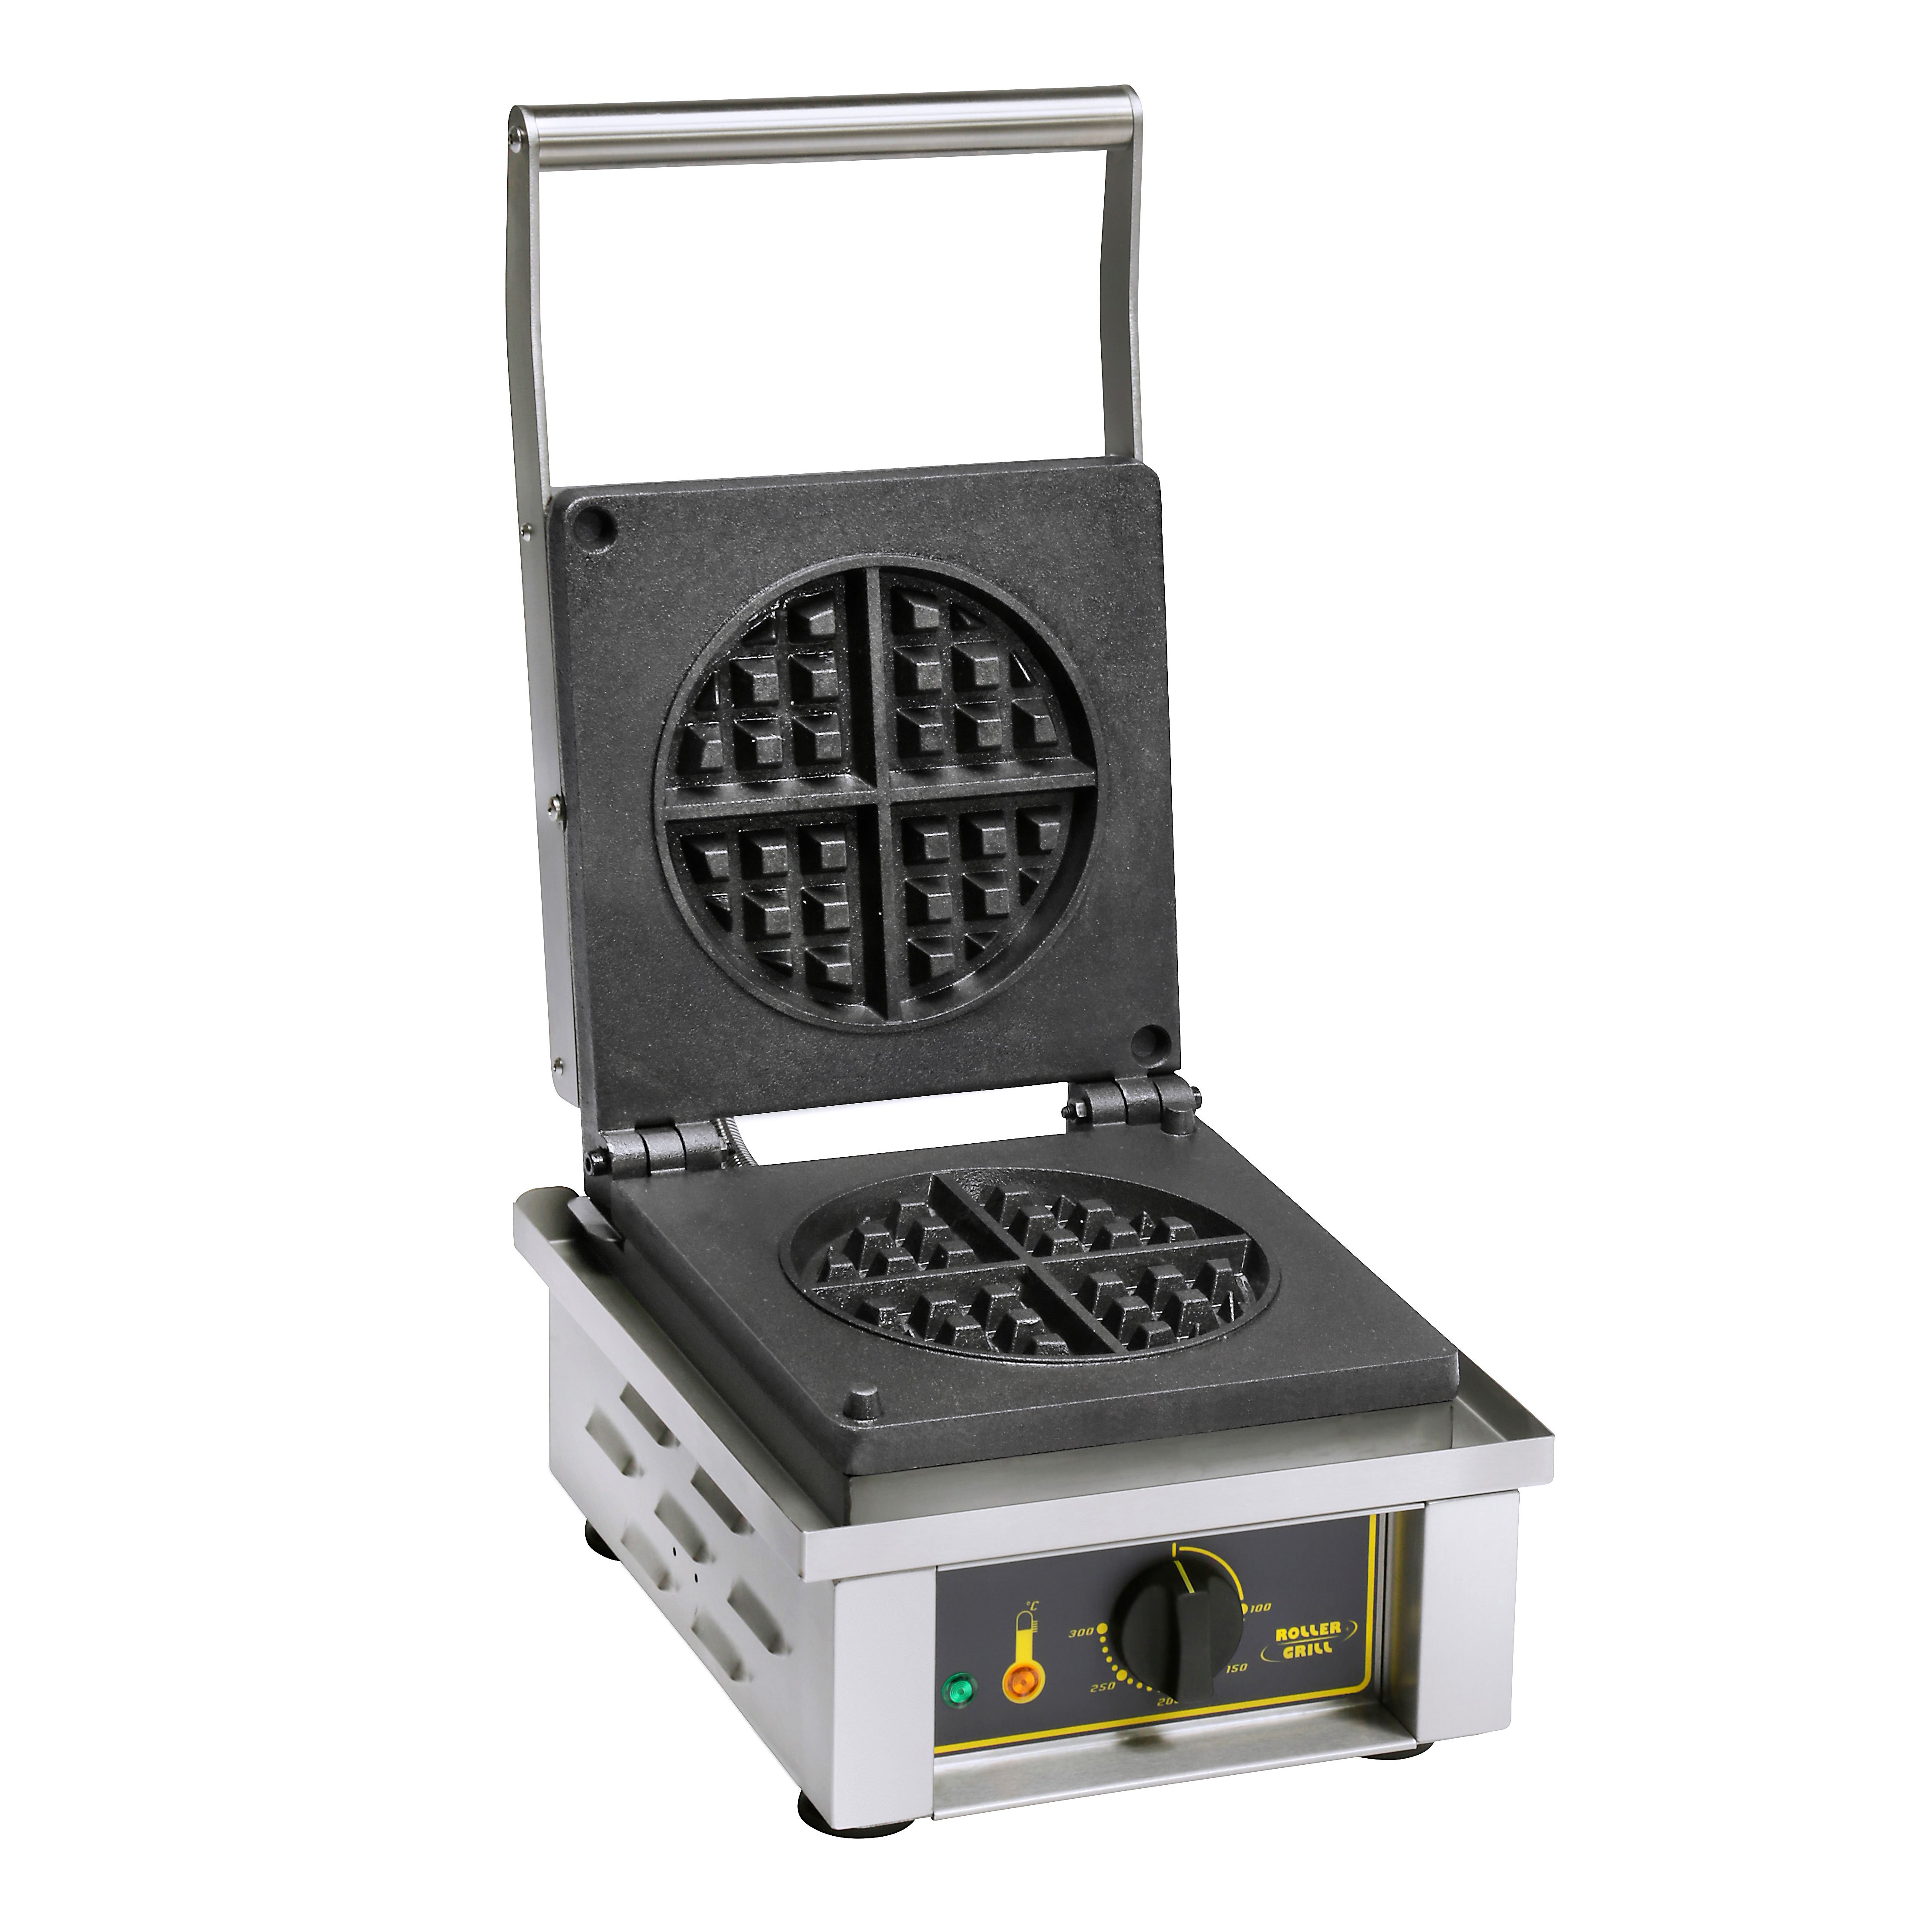 Equipex GES75 Single Classic Belgian Waffle Baker, Cast Iron Plates- Heavy Duty Top Plate